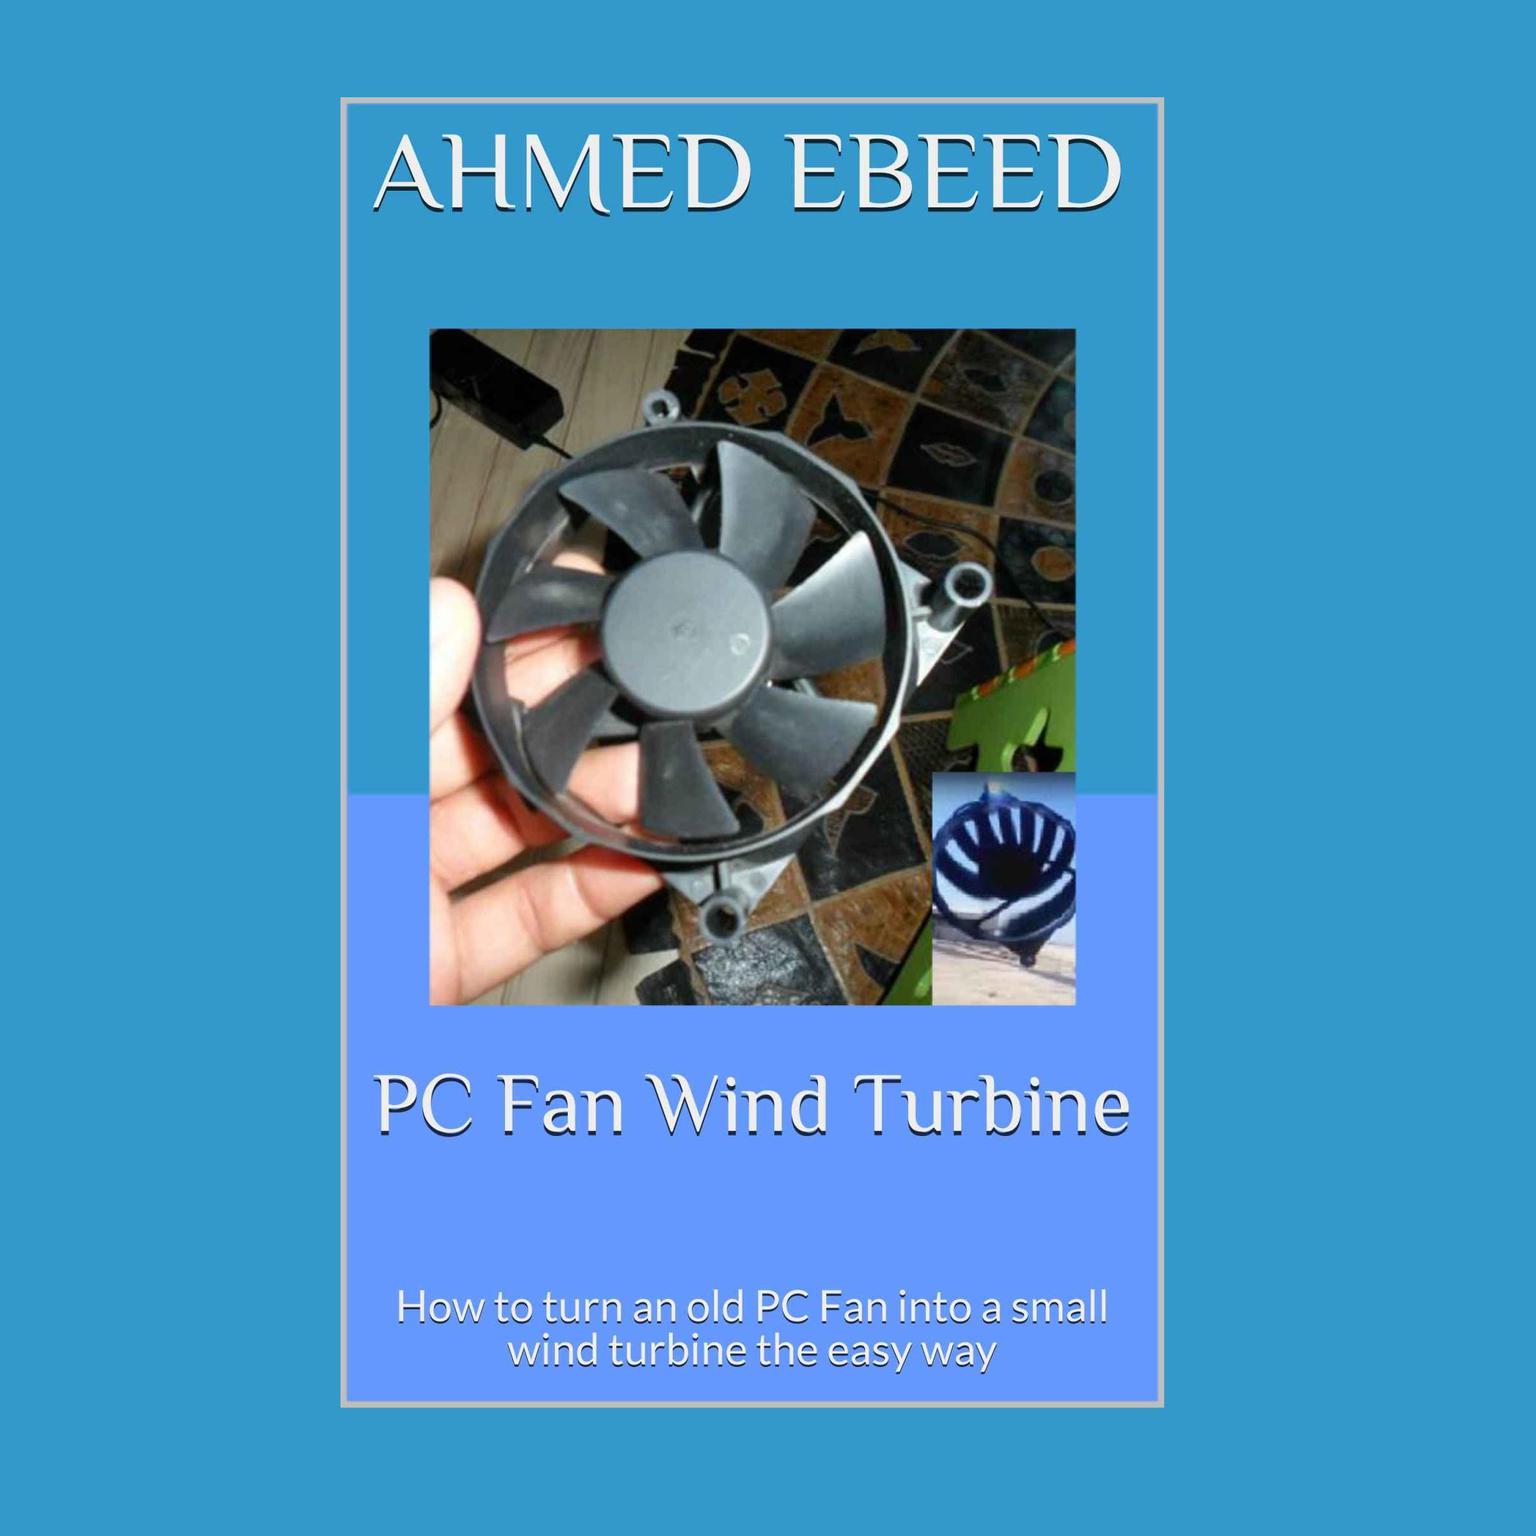 PC Fan Wind Turbine: How to turn an old PC Fan into a small wind turbine the easy way Audiobook, by Ahmed Ebeed